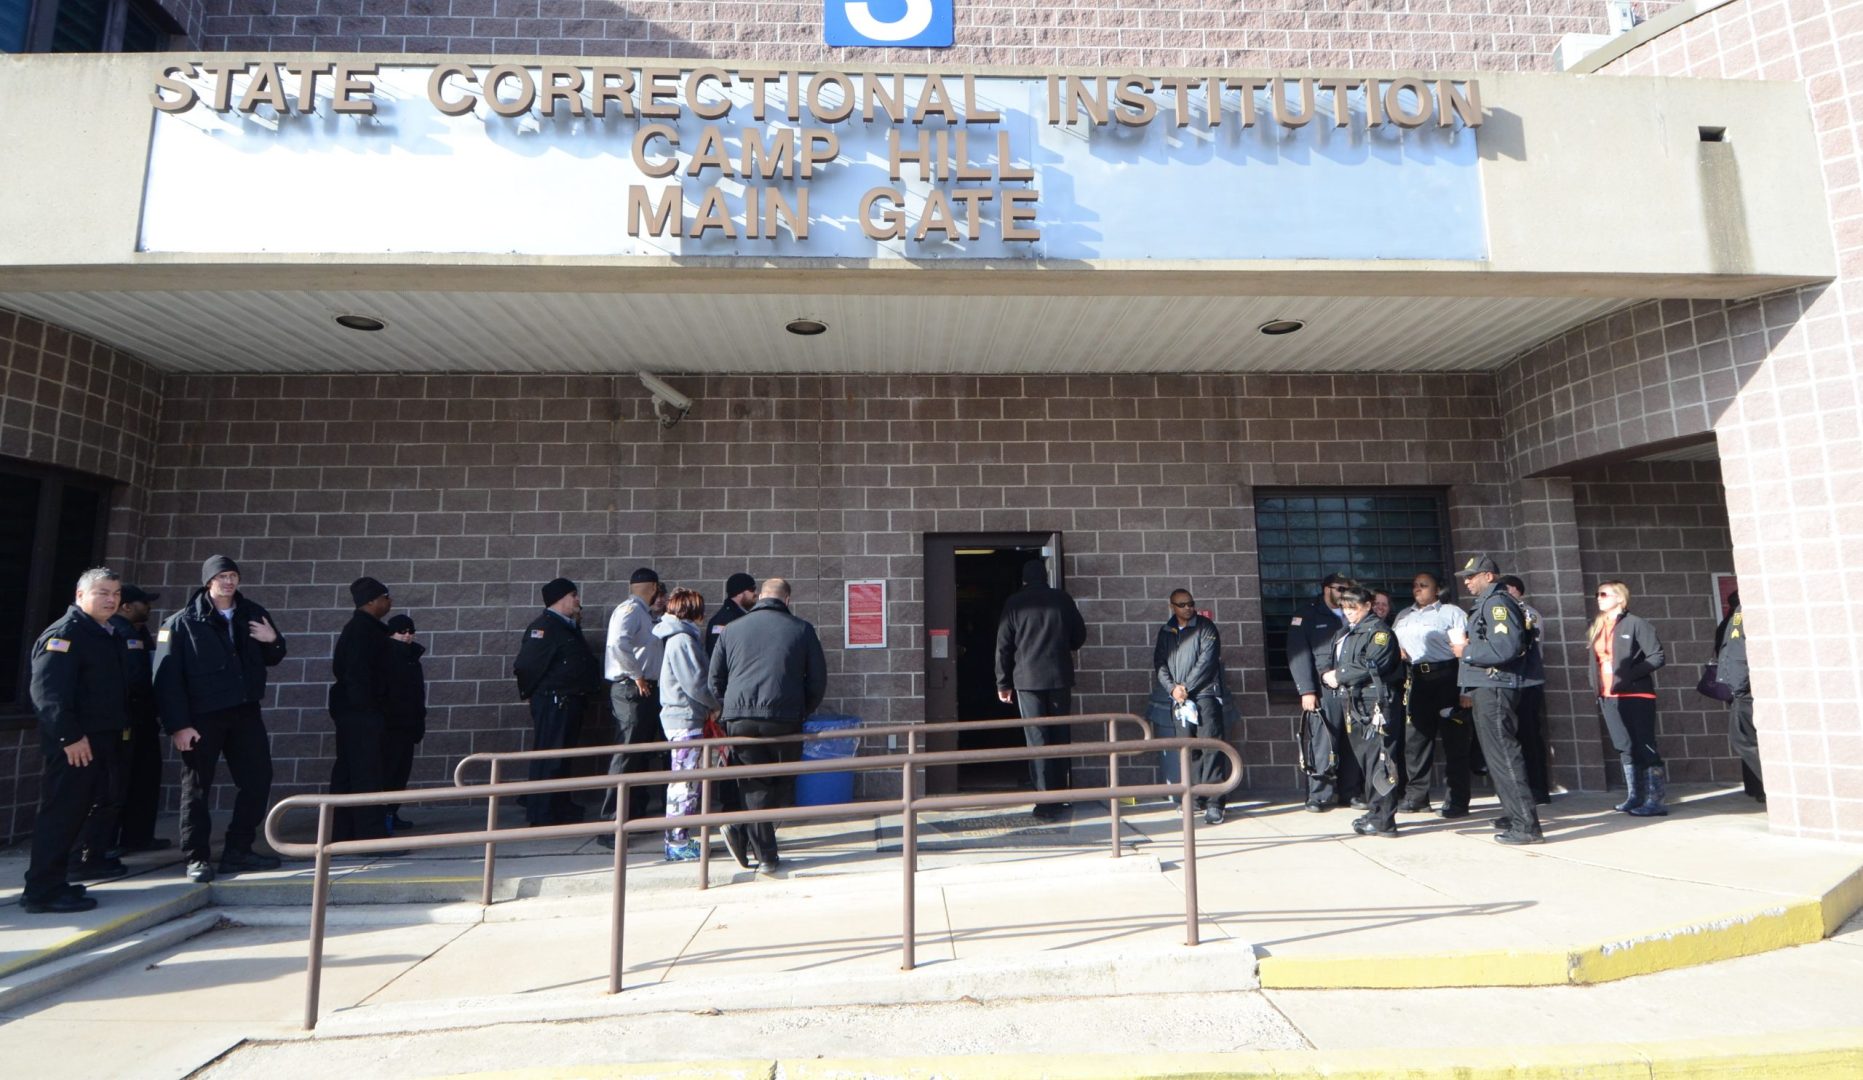 FILE PHOTO: Corrections officers arrive for their shift at the State Correctional Institution at Camp Hill on Jan. 13, 2017, in Camp Hill, Pa.